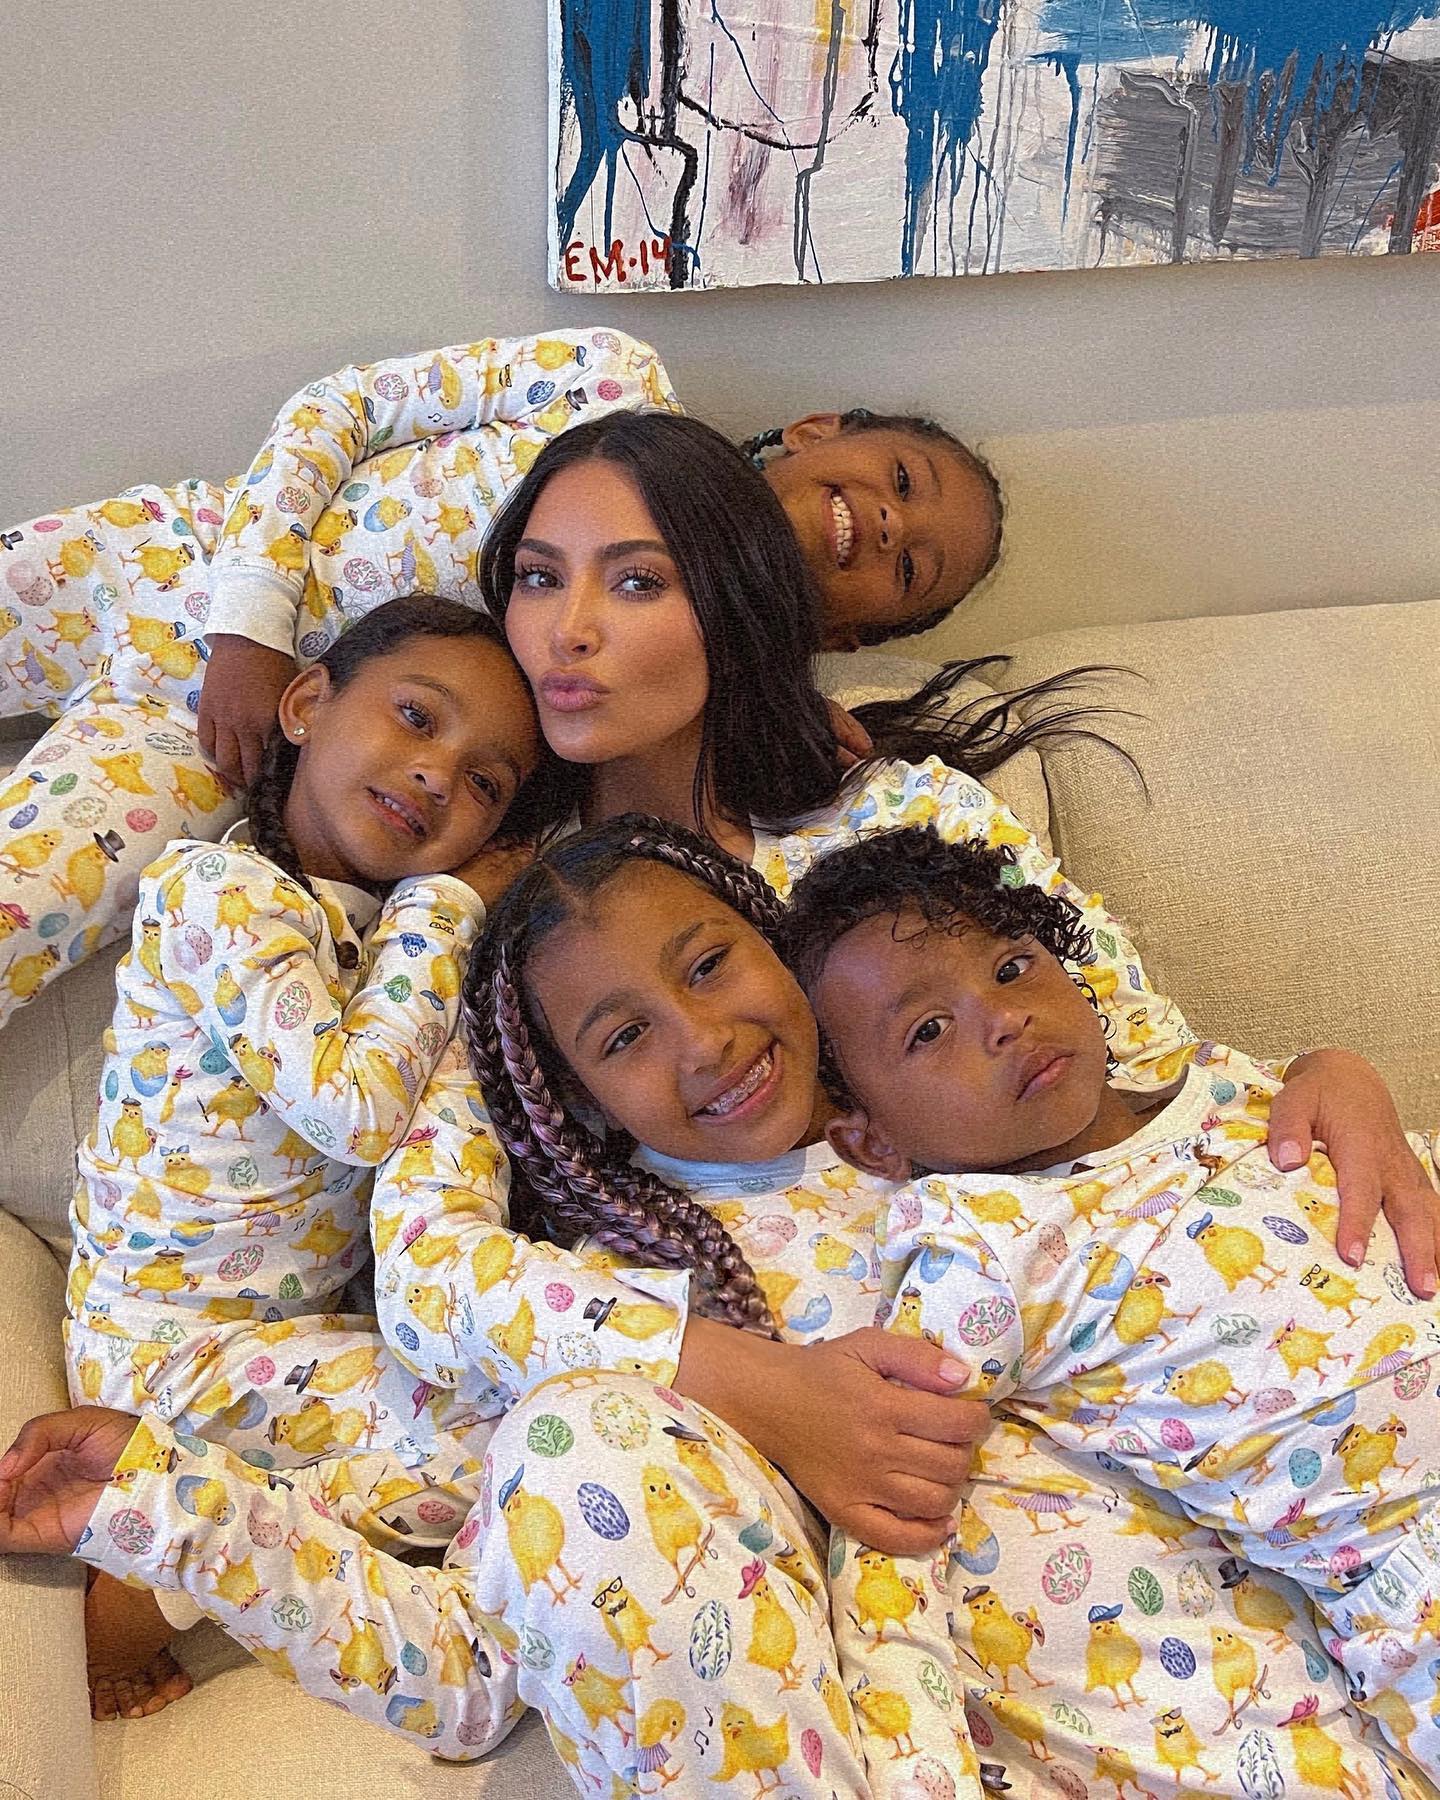 Kim has four kids with her ex Kanye West - North, 10, Saint, 8, Chicago, 6, and Psalm, 4